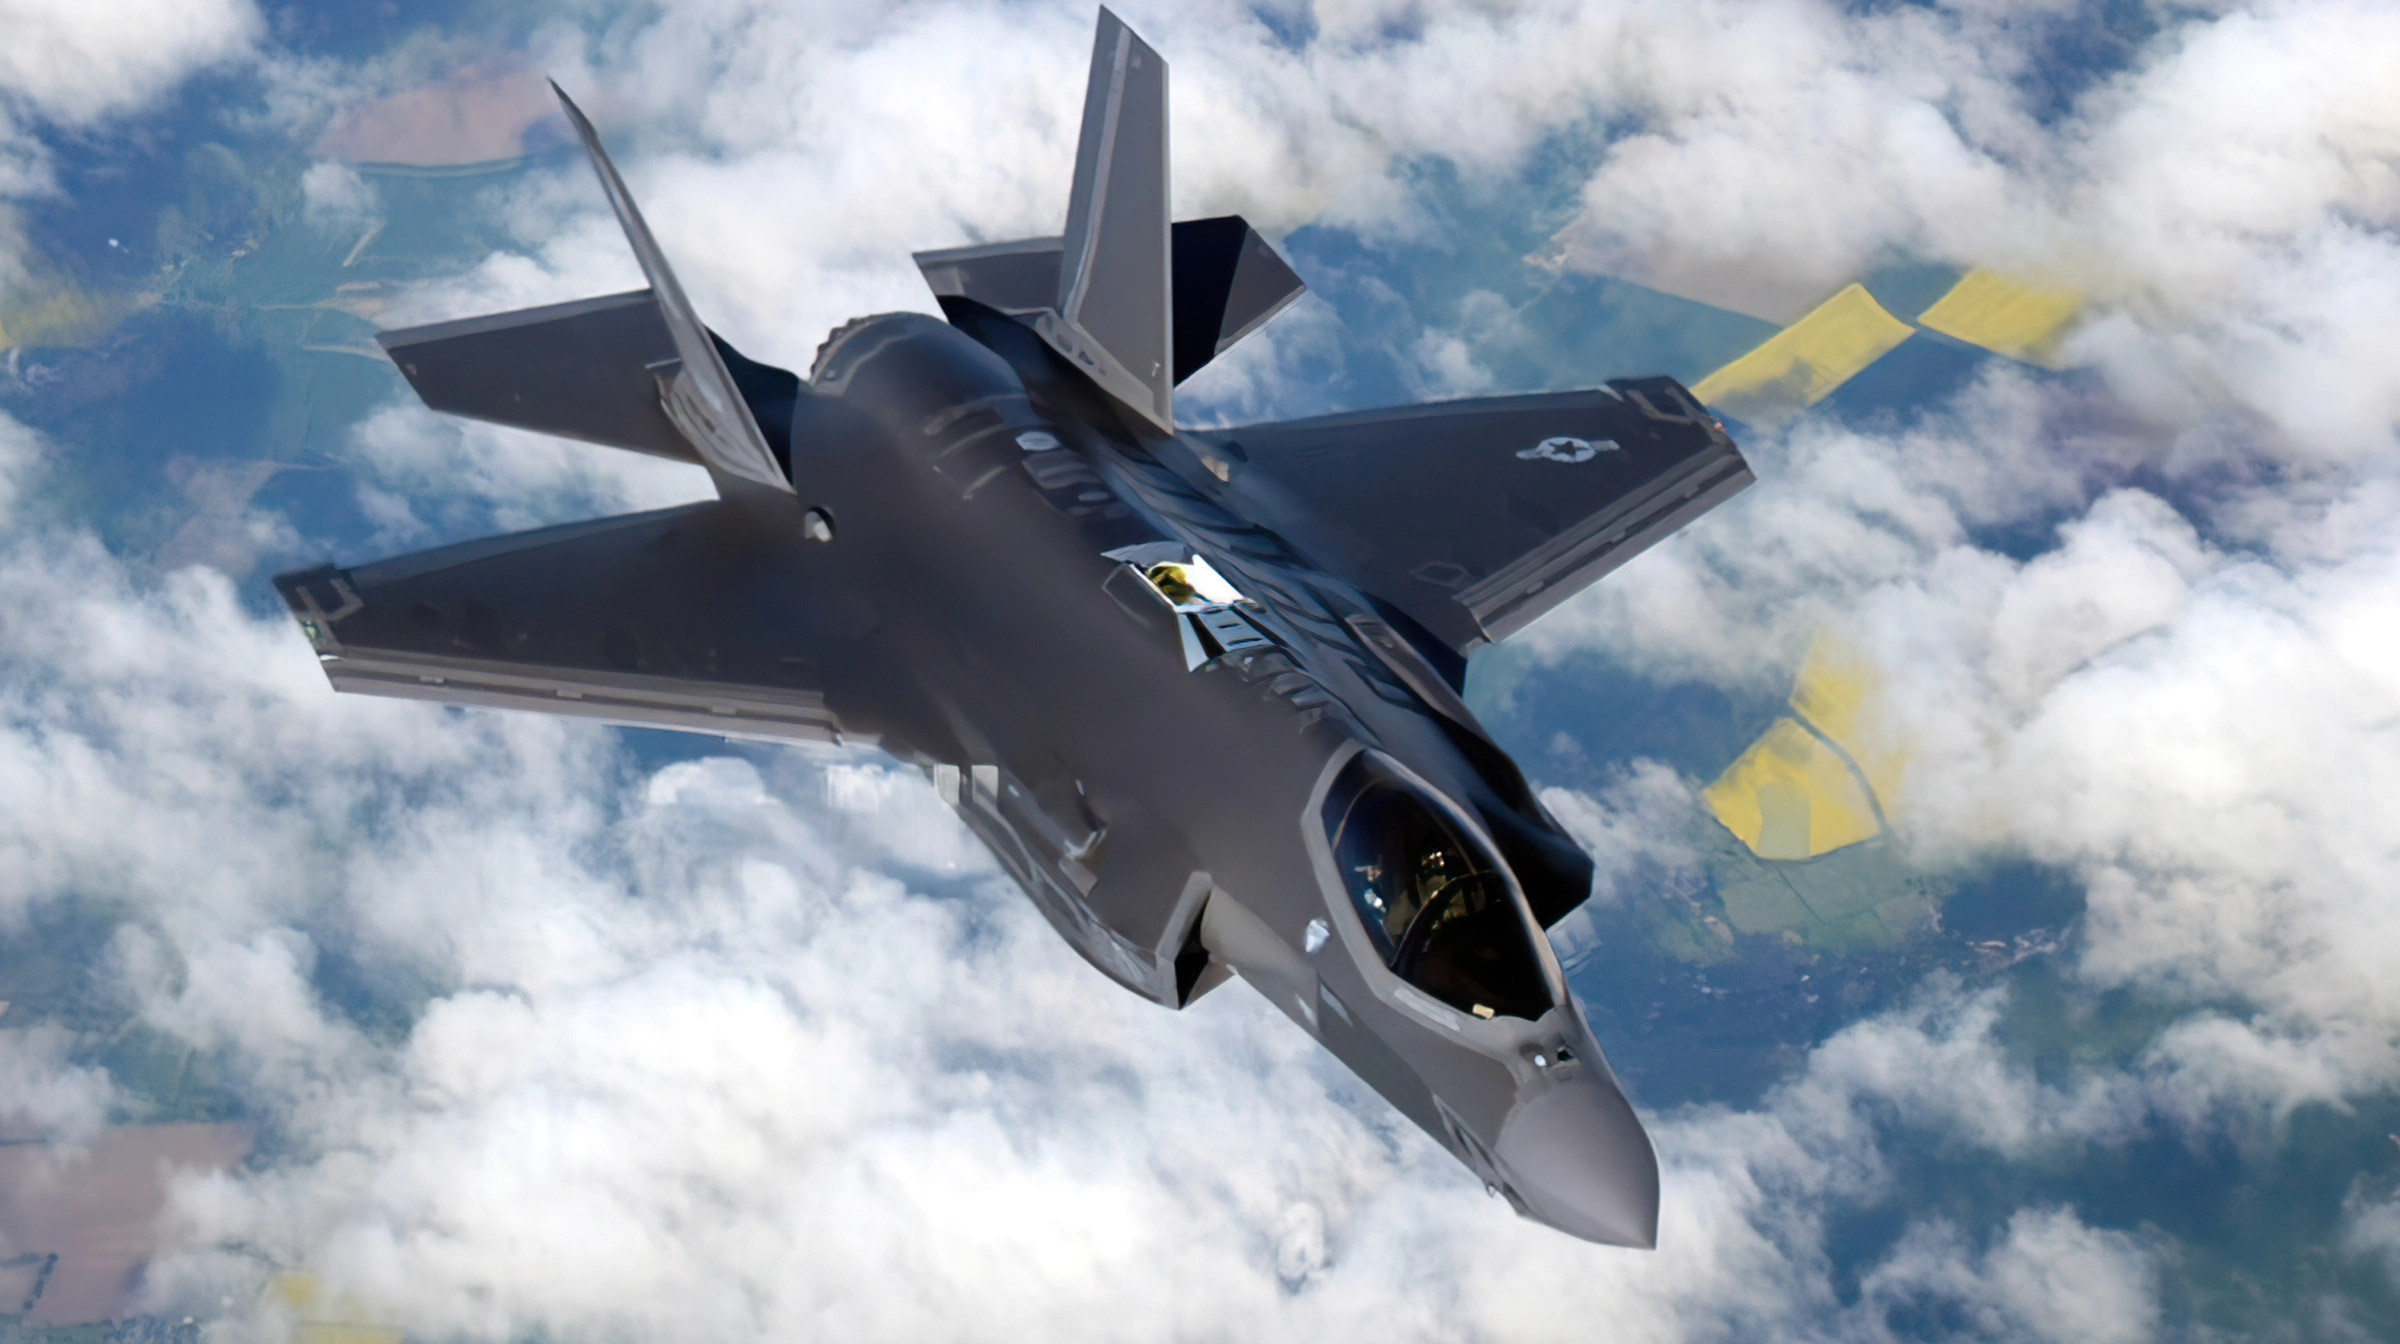 F-35 production plunges as Chinese J-20 gains ground